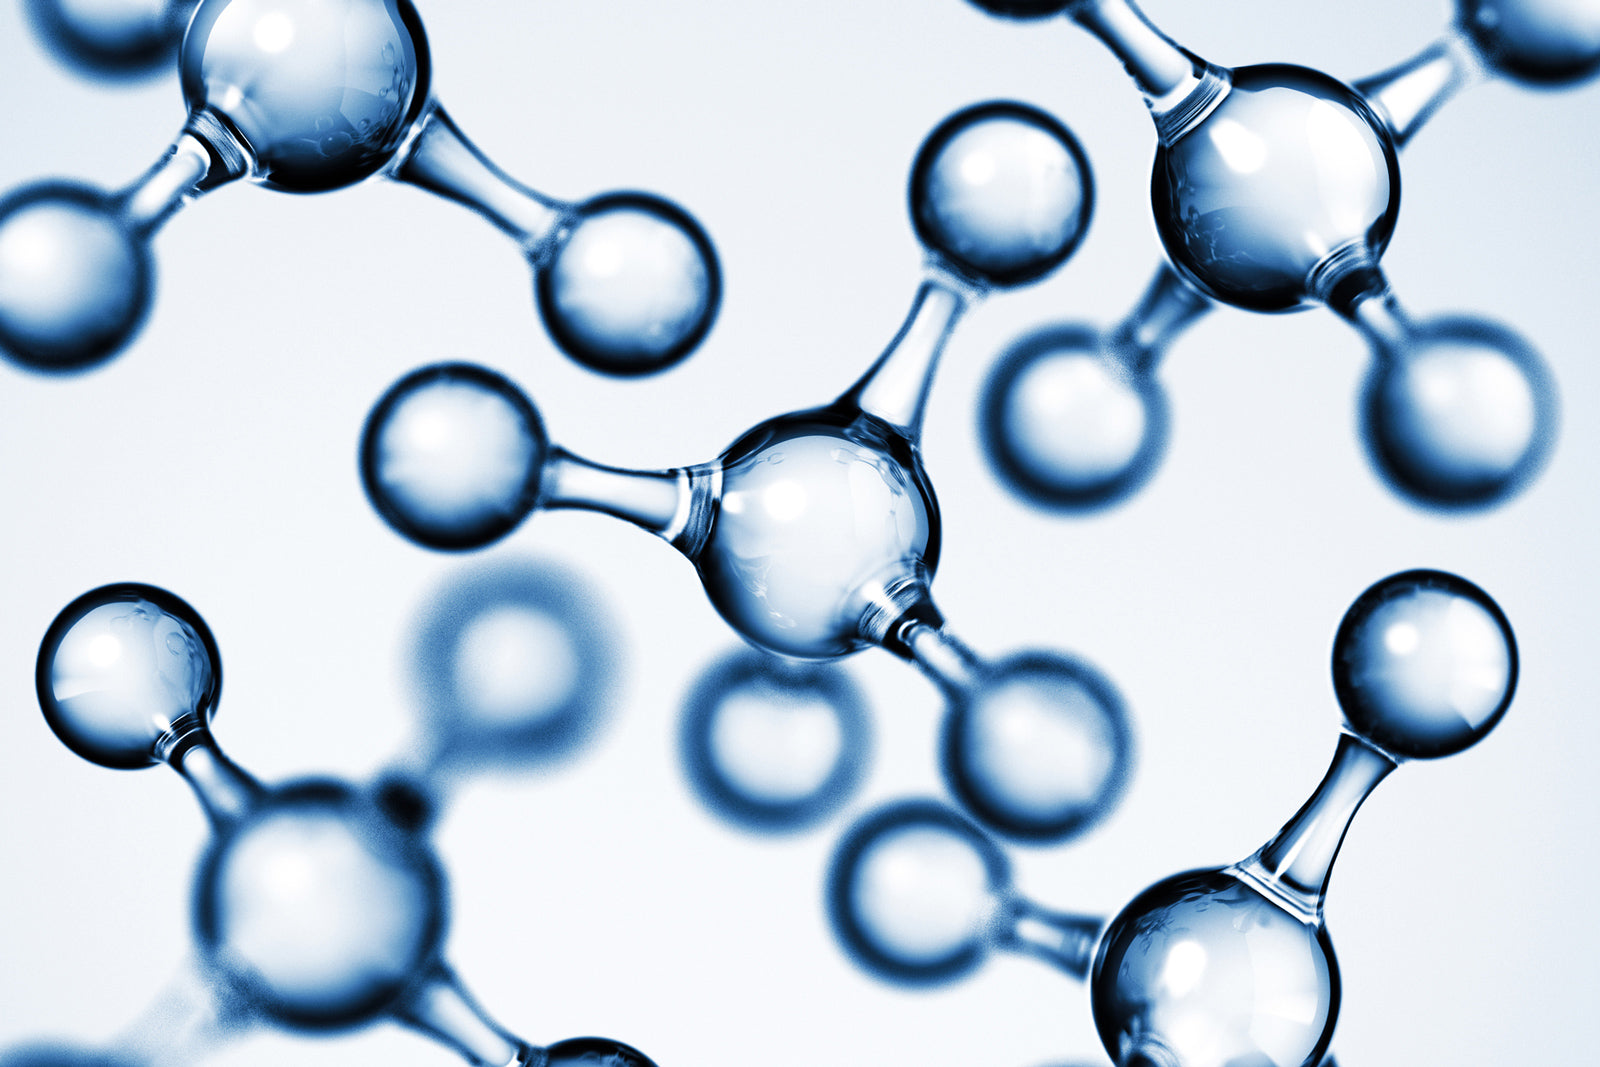 What is Hyaluronic acid?